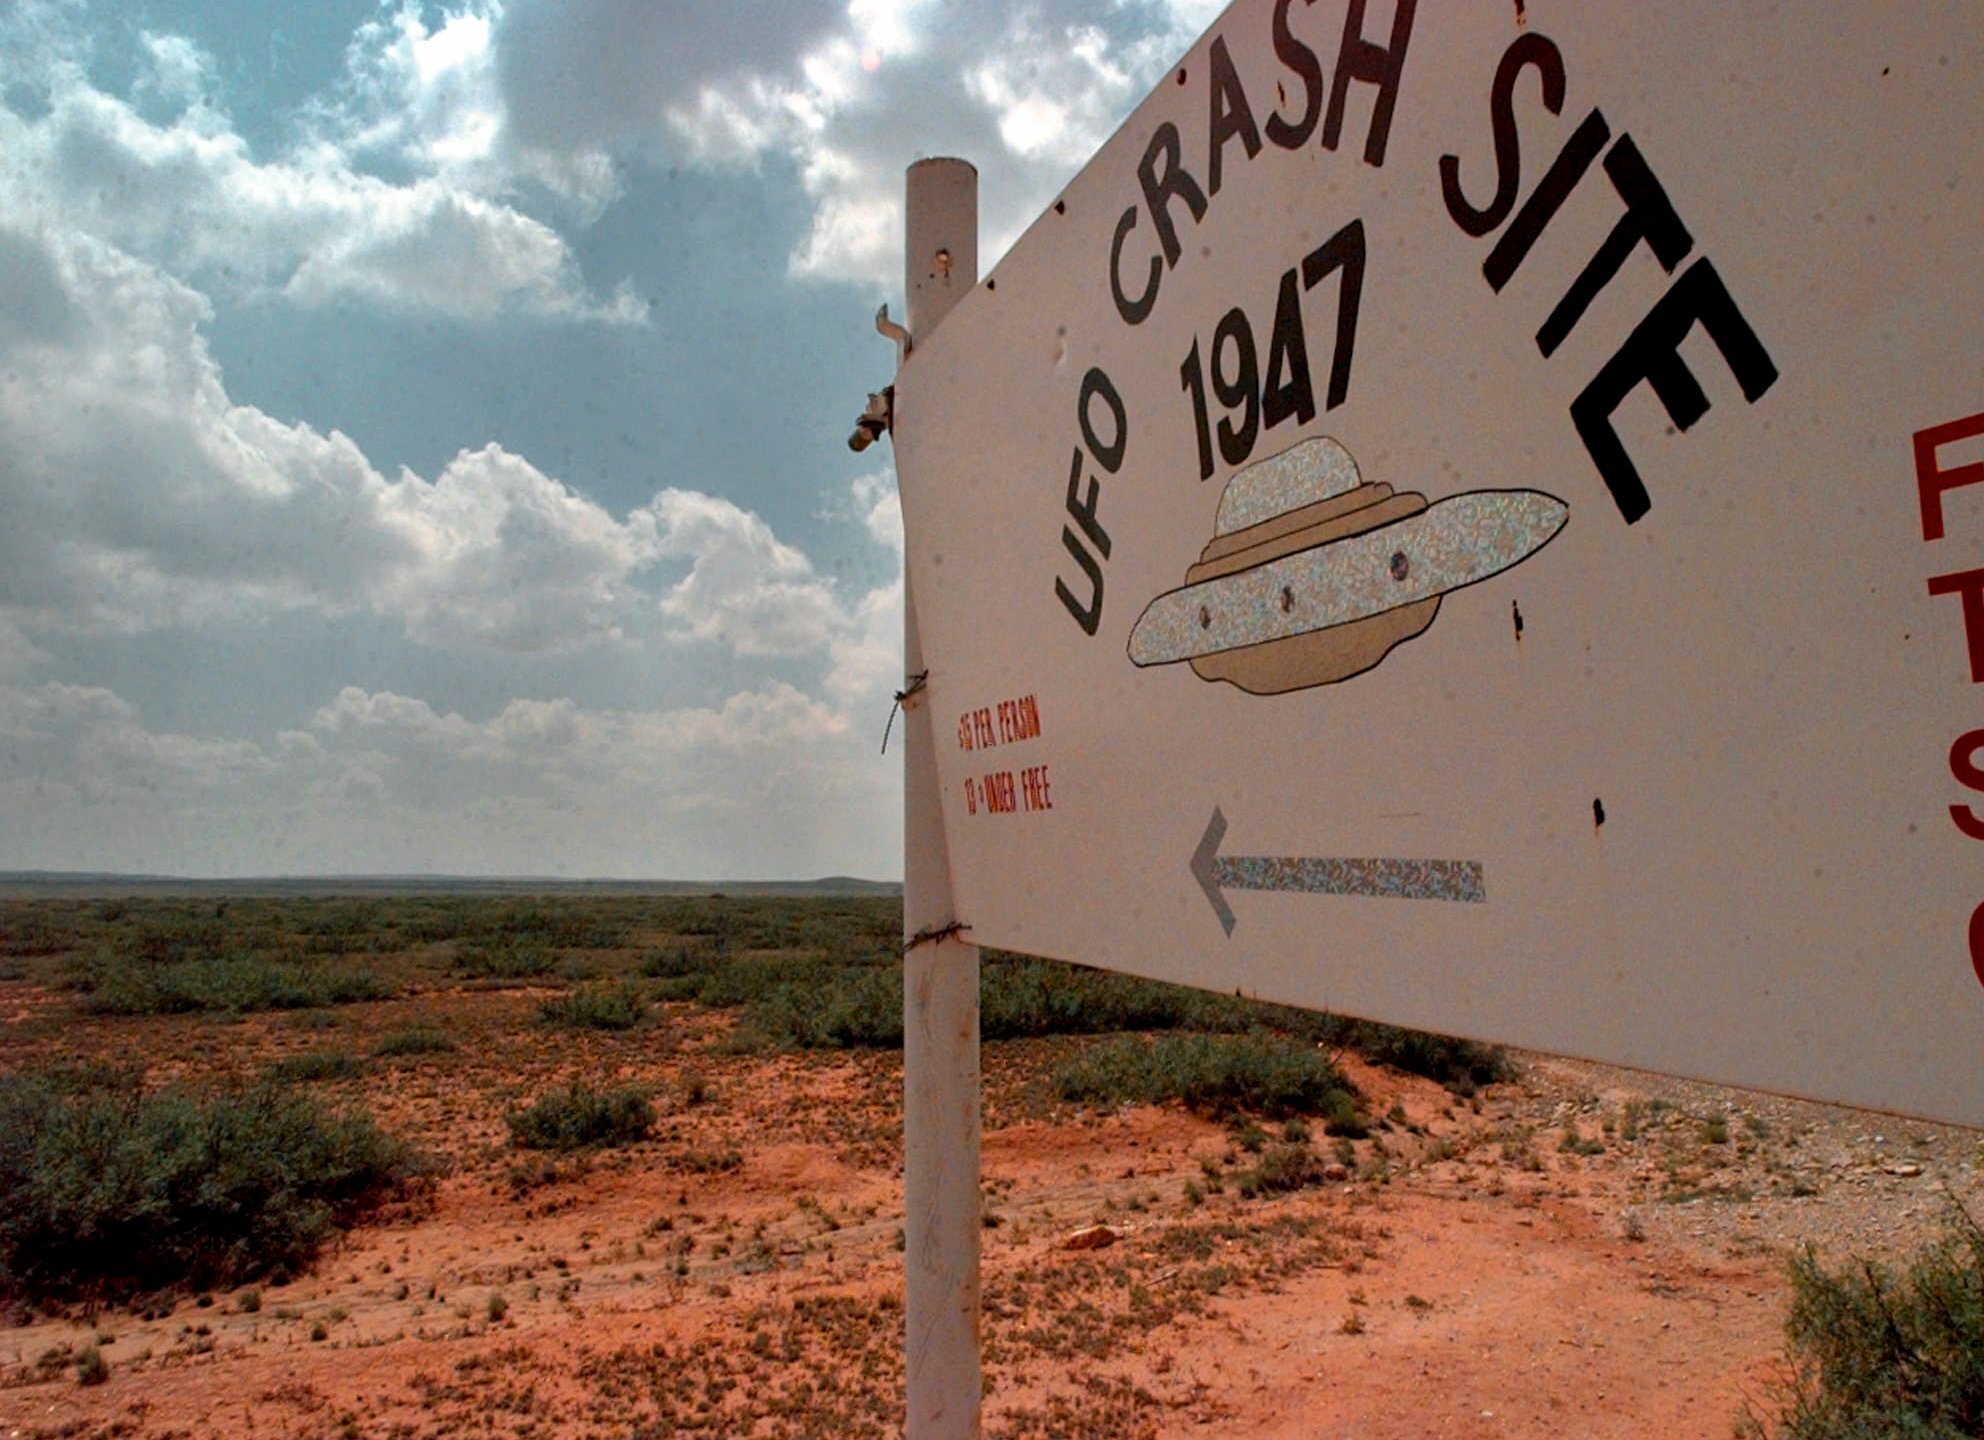 FILE - A sign directs travelers to the start of the "1947 UFO Crash Site Tours" in Roswell, N.M., June 10, 1997. World UFO Day is being celebrated amid a surge in sightings and government studies on unidentified flying objects. Its date of July 2nd has its roots in the so-called Roswell incident on July 2, 1947. (AP Photo/Eric Draper, File)